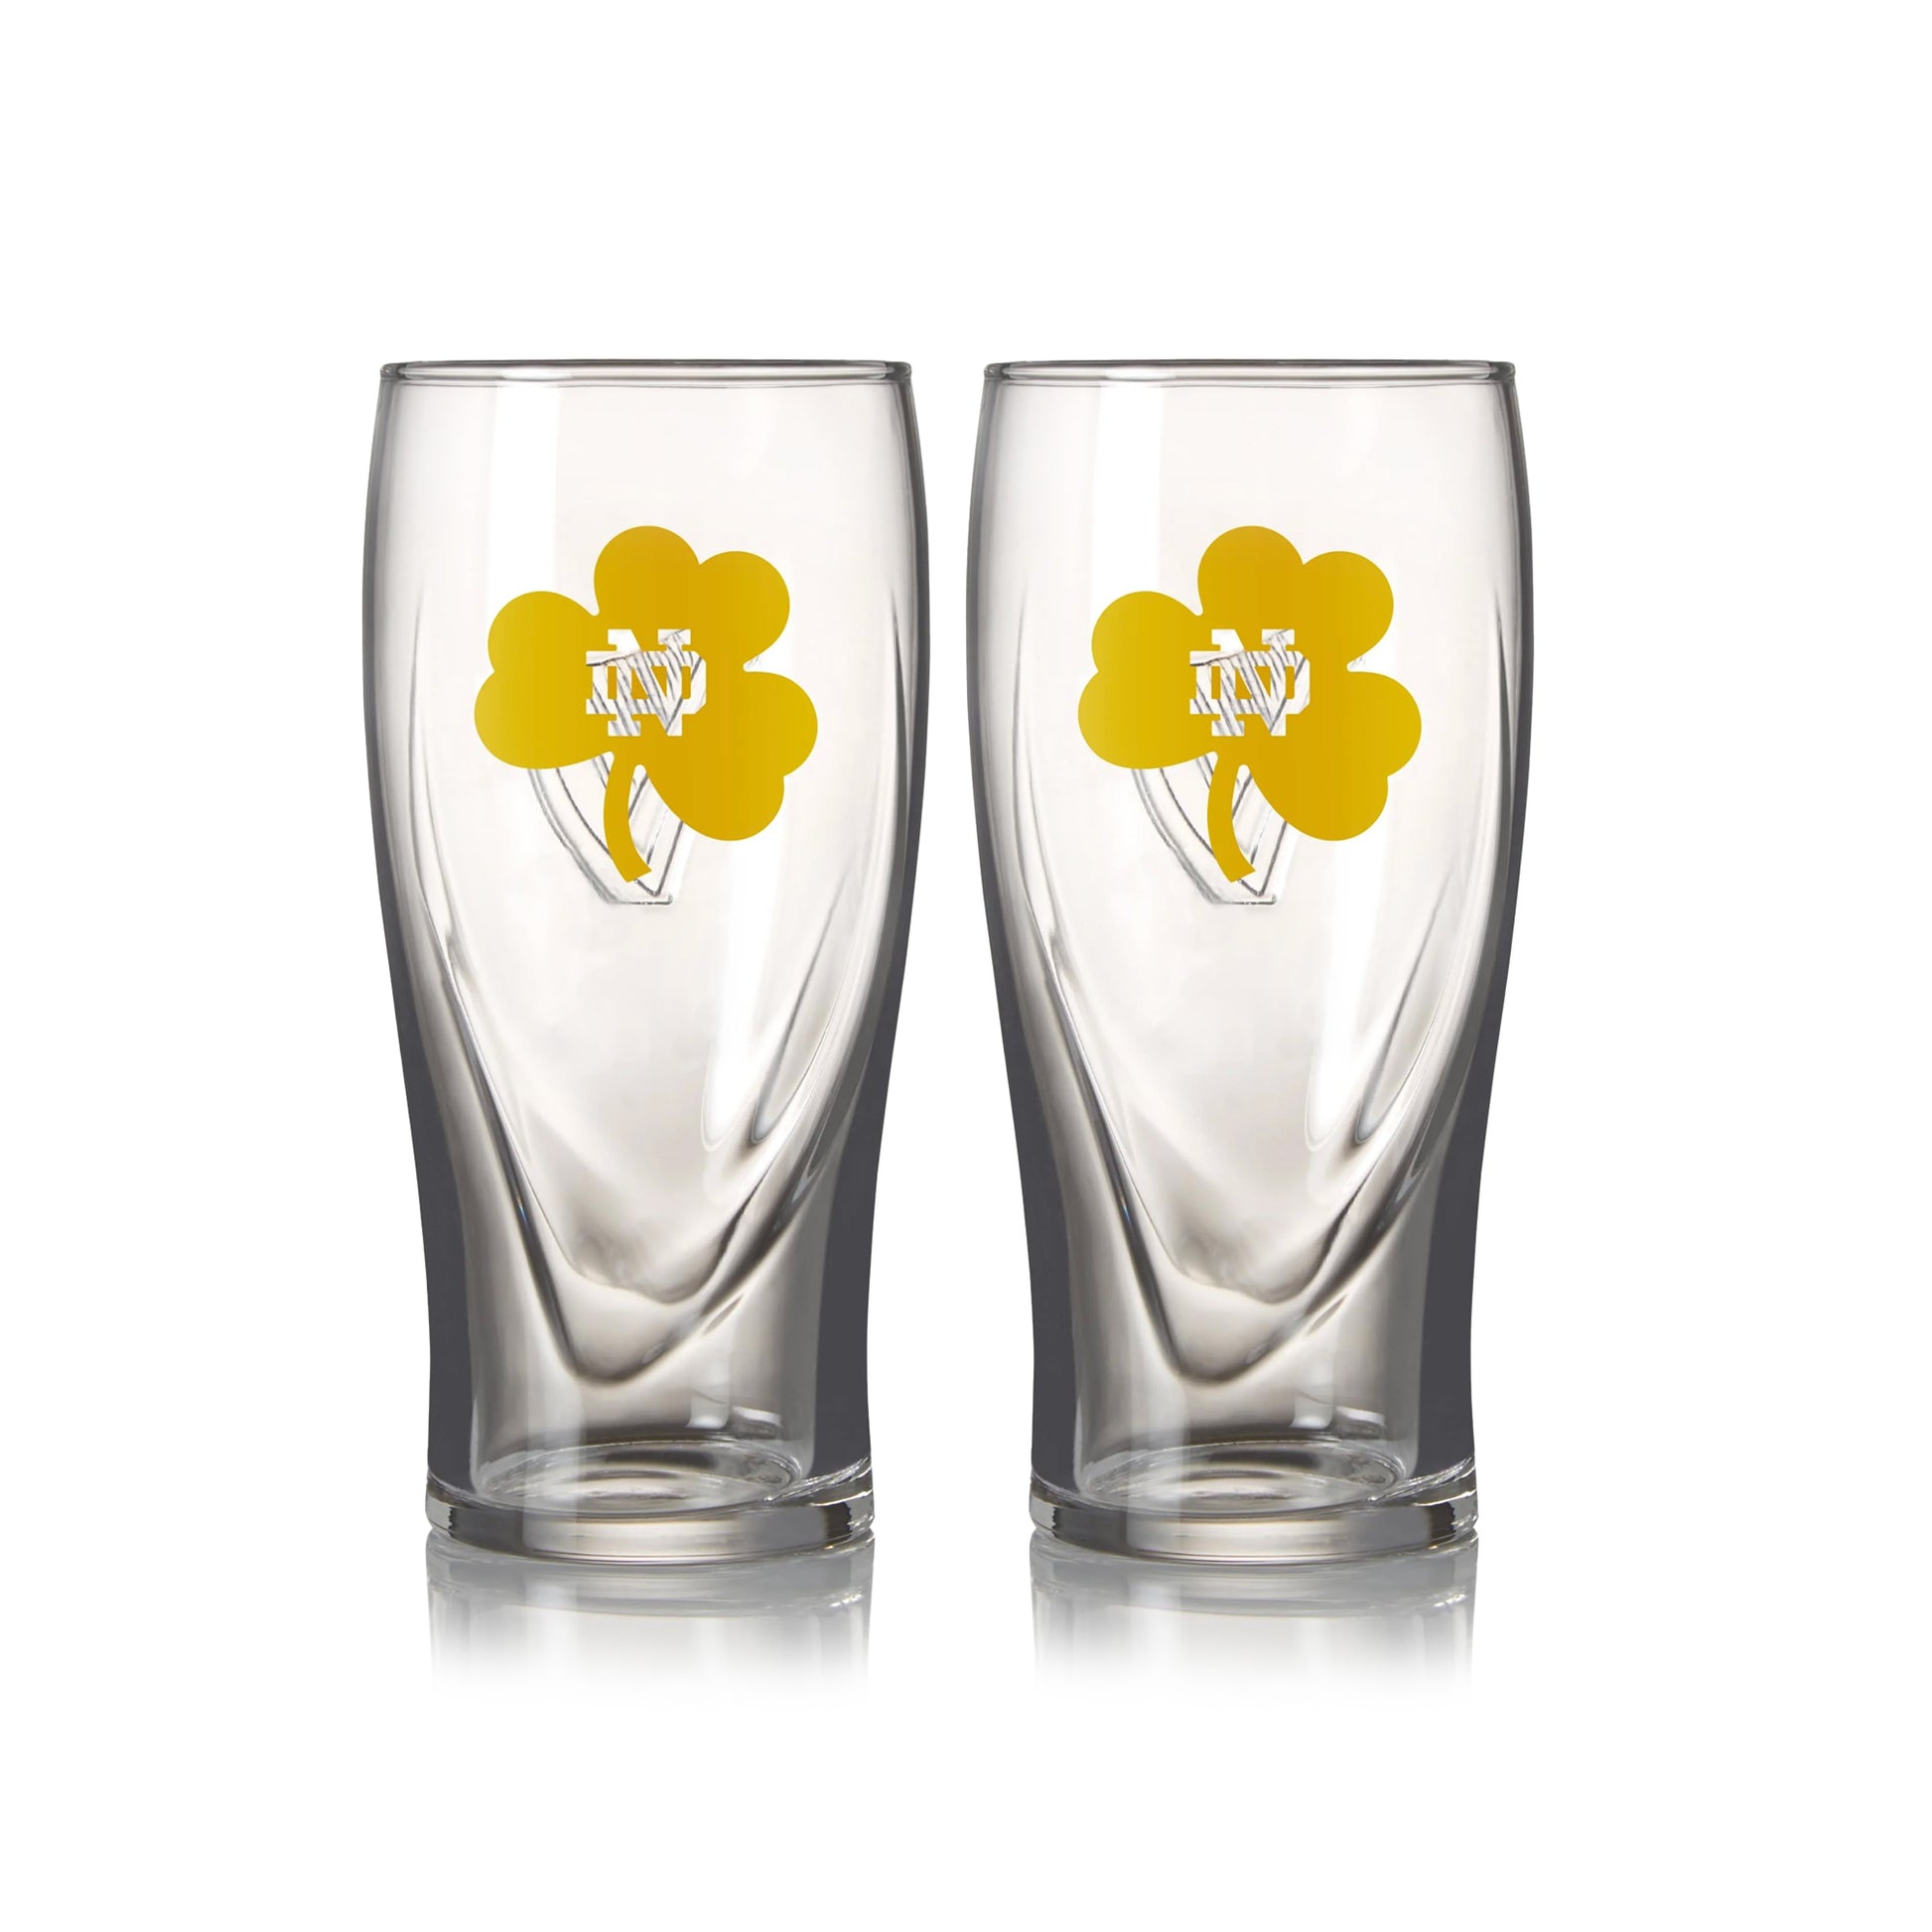 Two Notre Dame Guinness Shamrock 16oz Pint Glasses with two shamrocks on them.